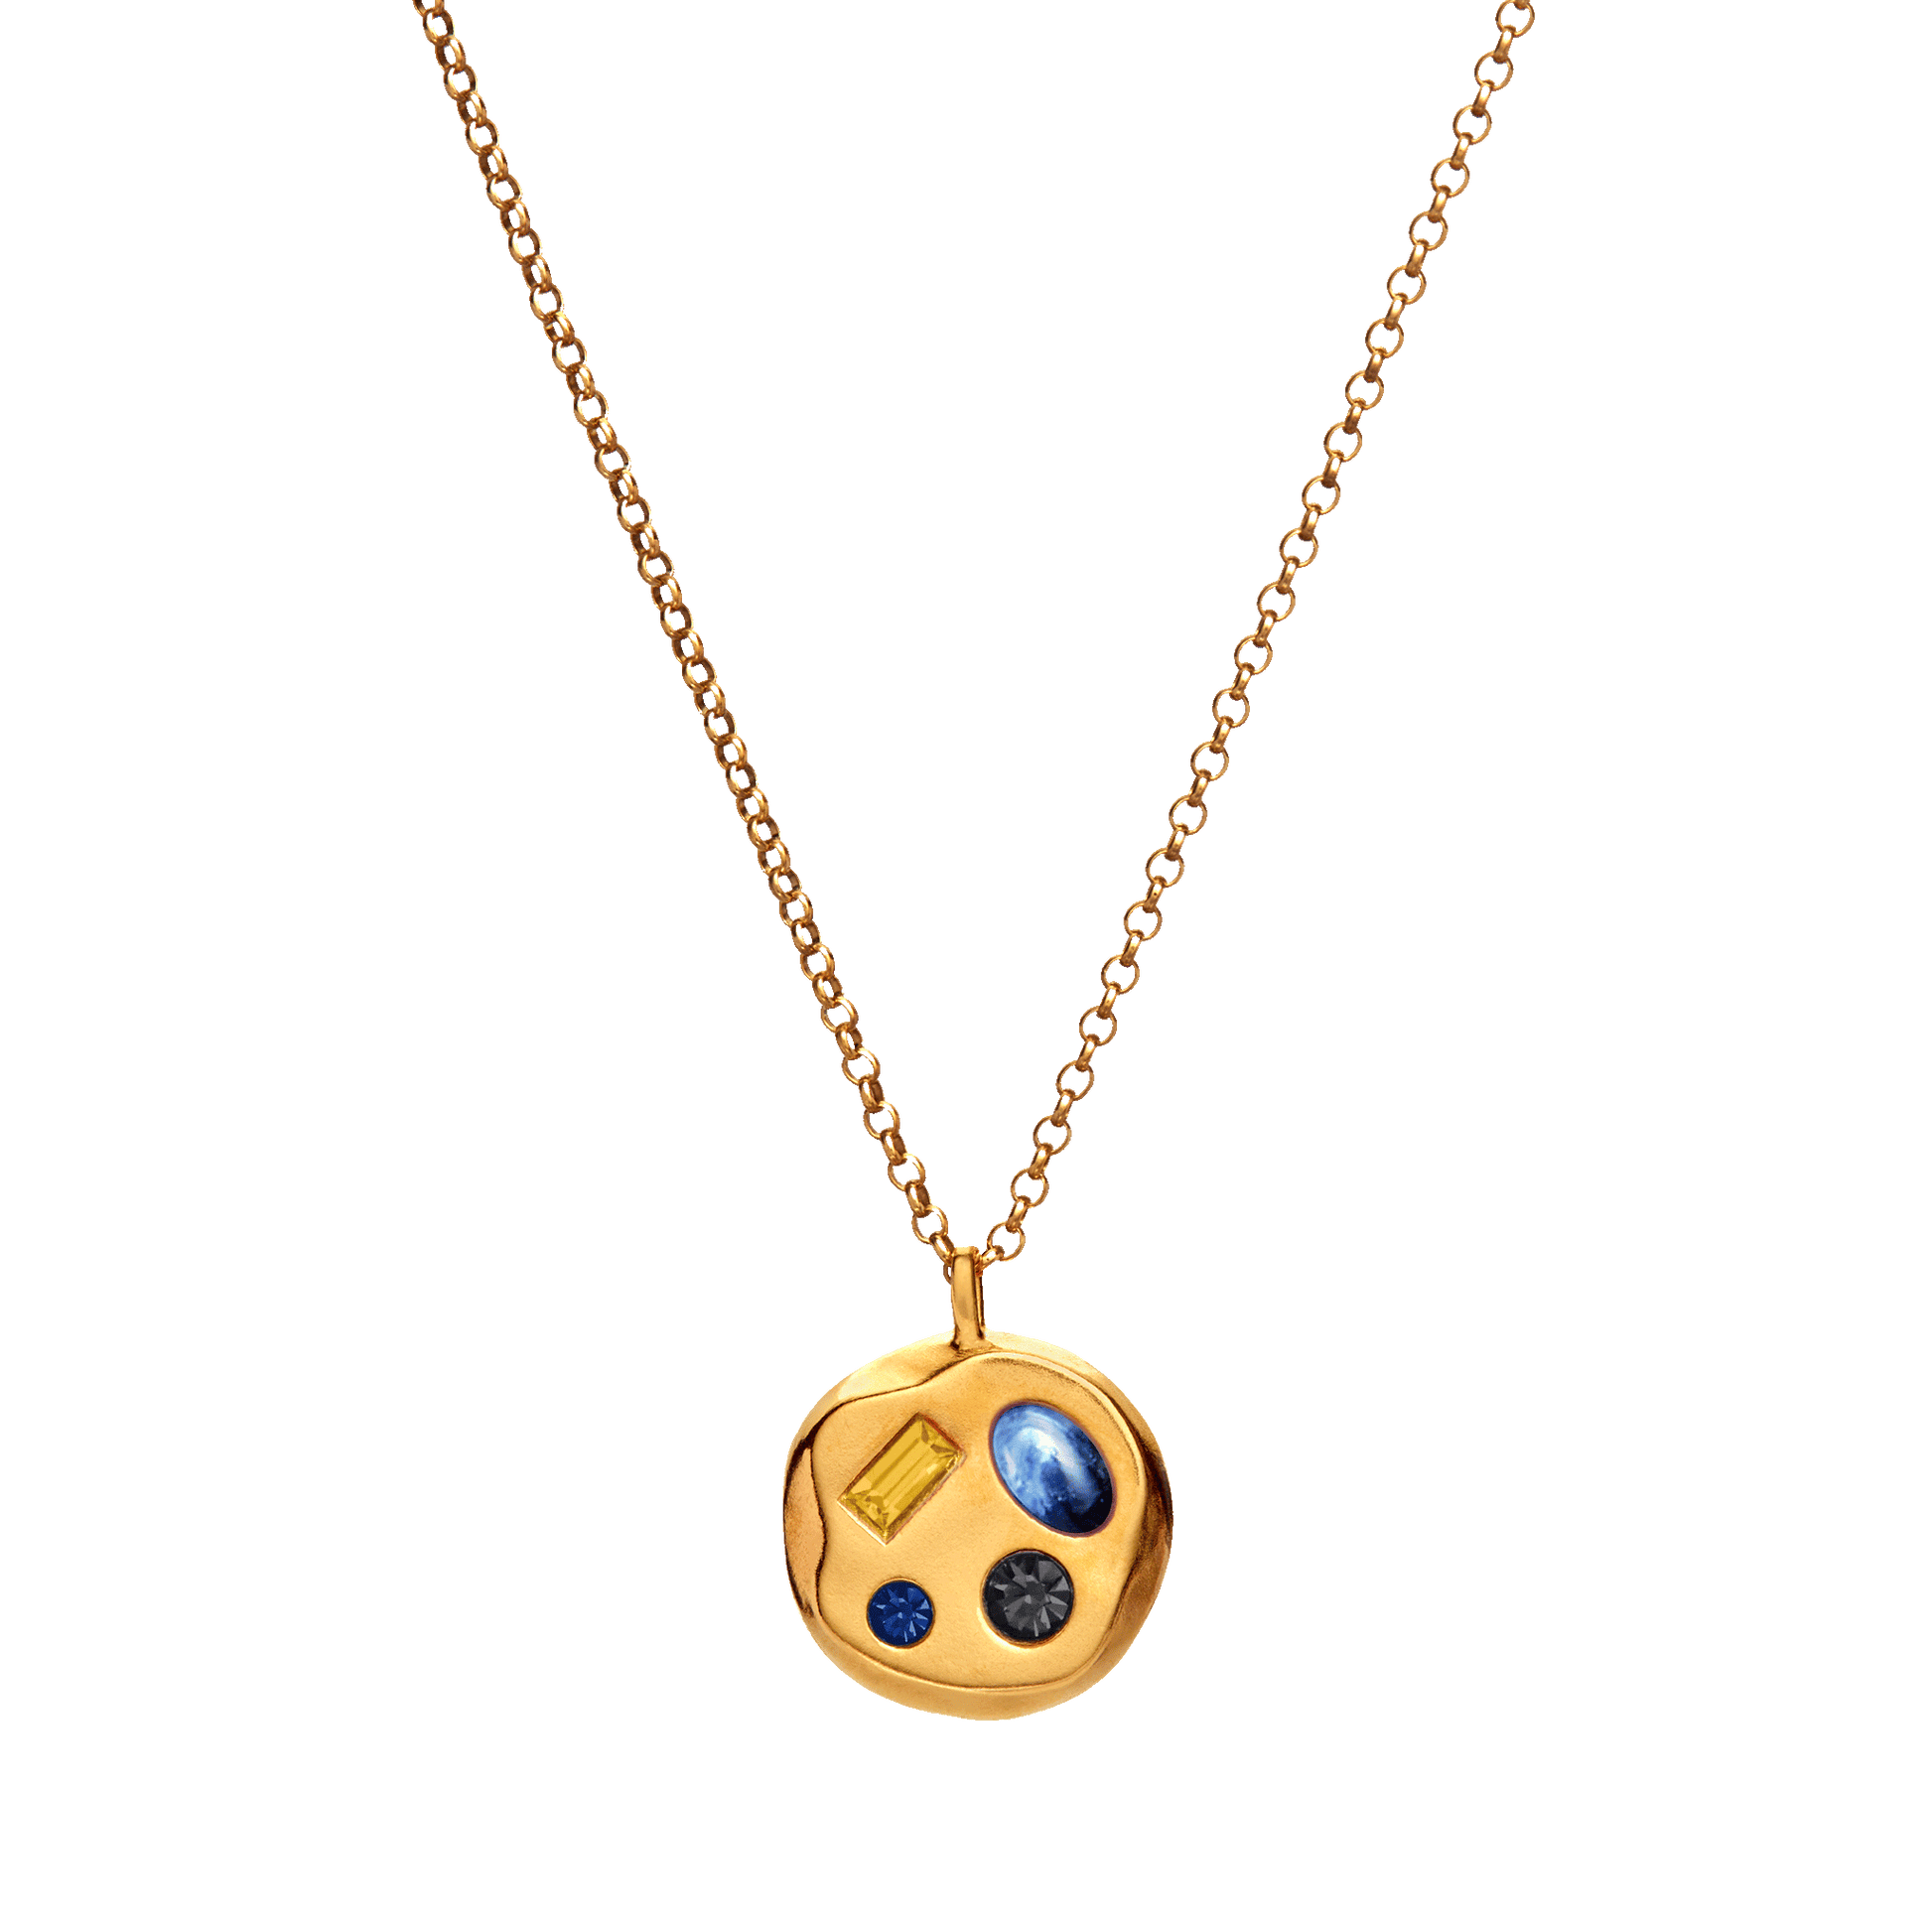 The November First Pendant